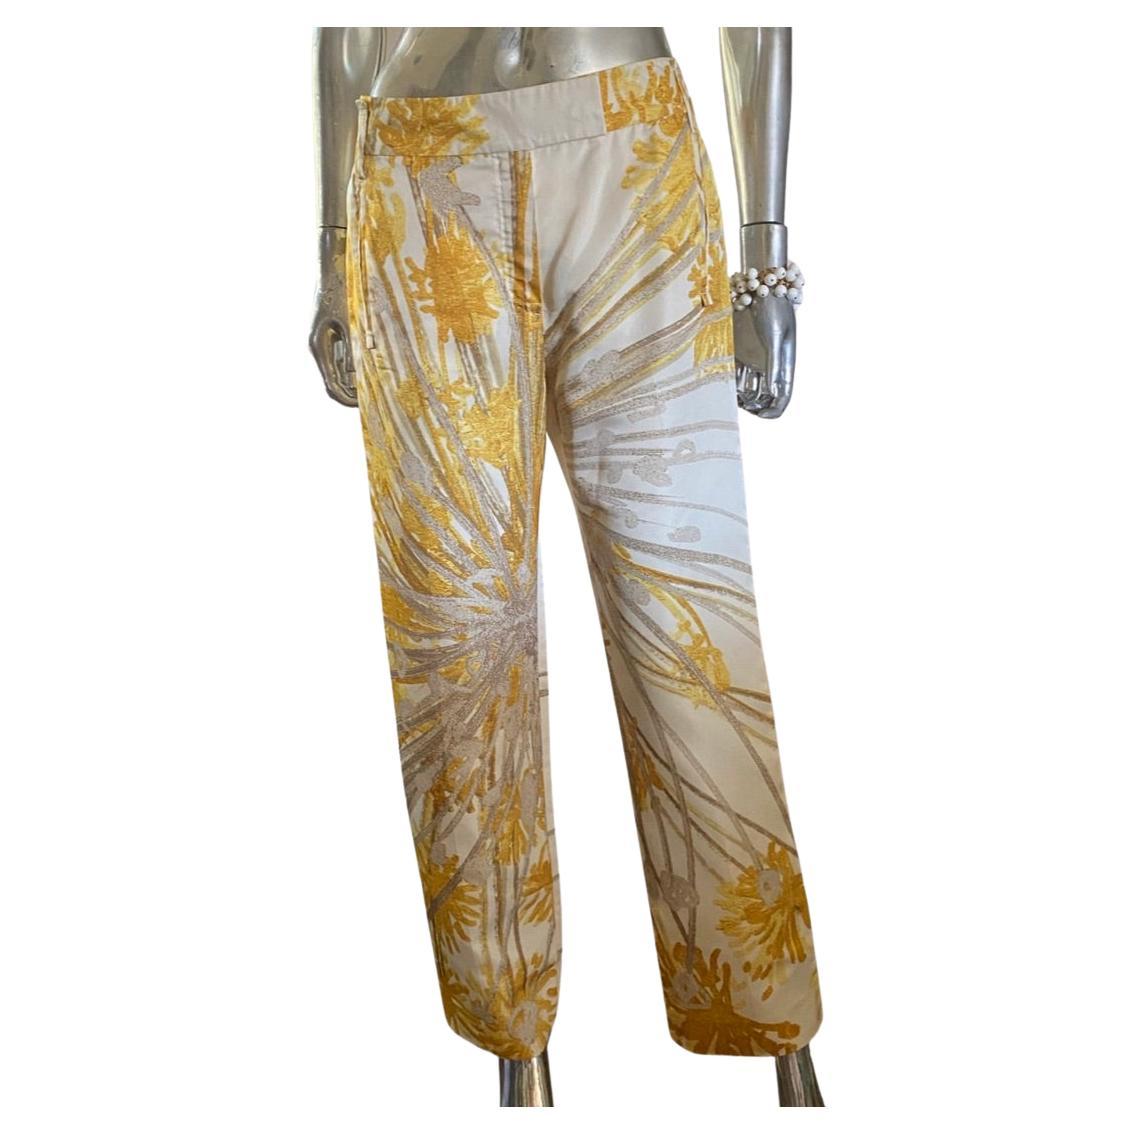 Brioni Italy Custom Made Silk Floral Print Trousers Size 6